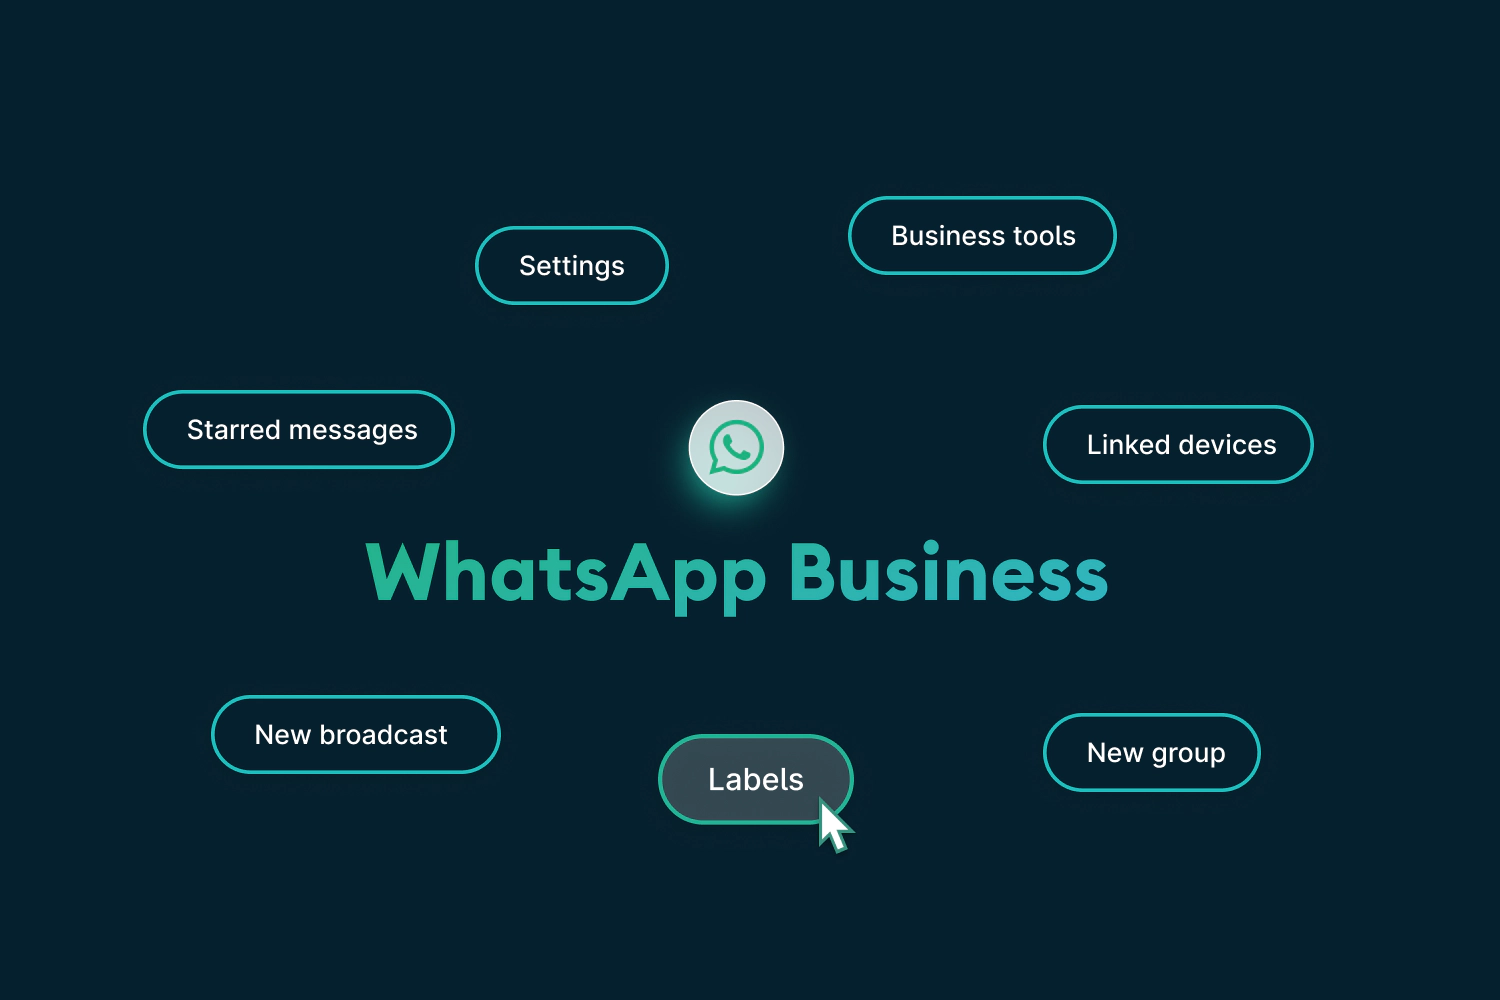 Features of WhatsApp